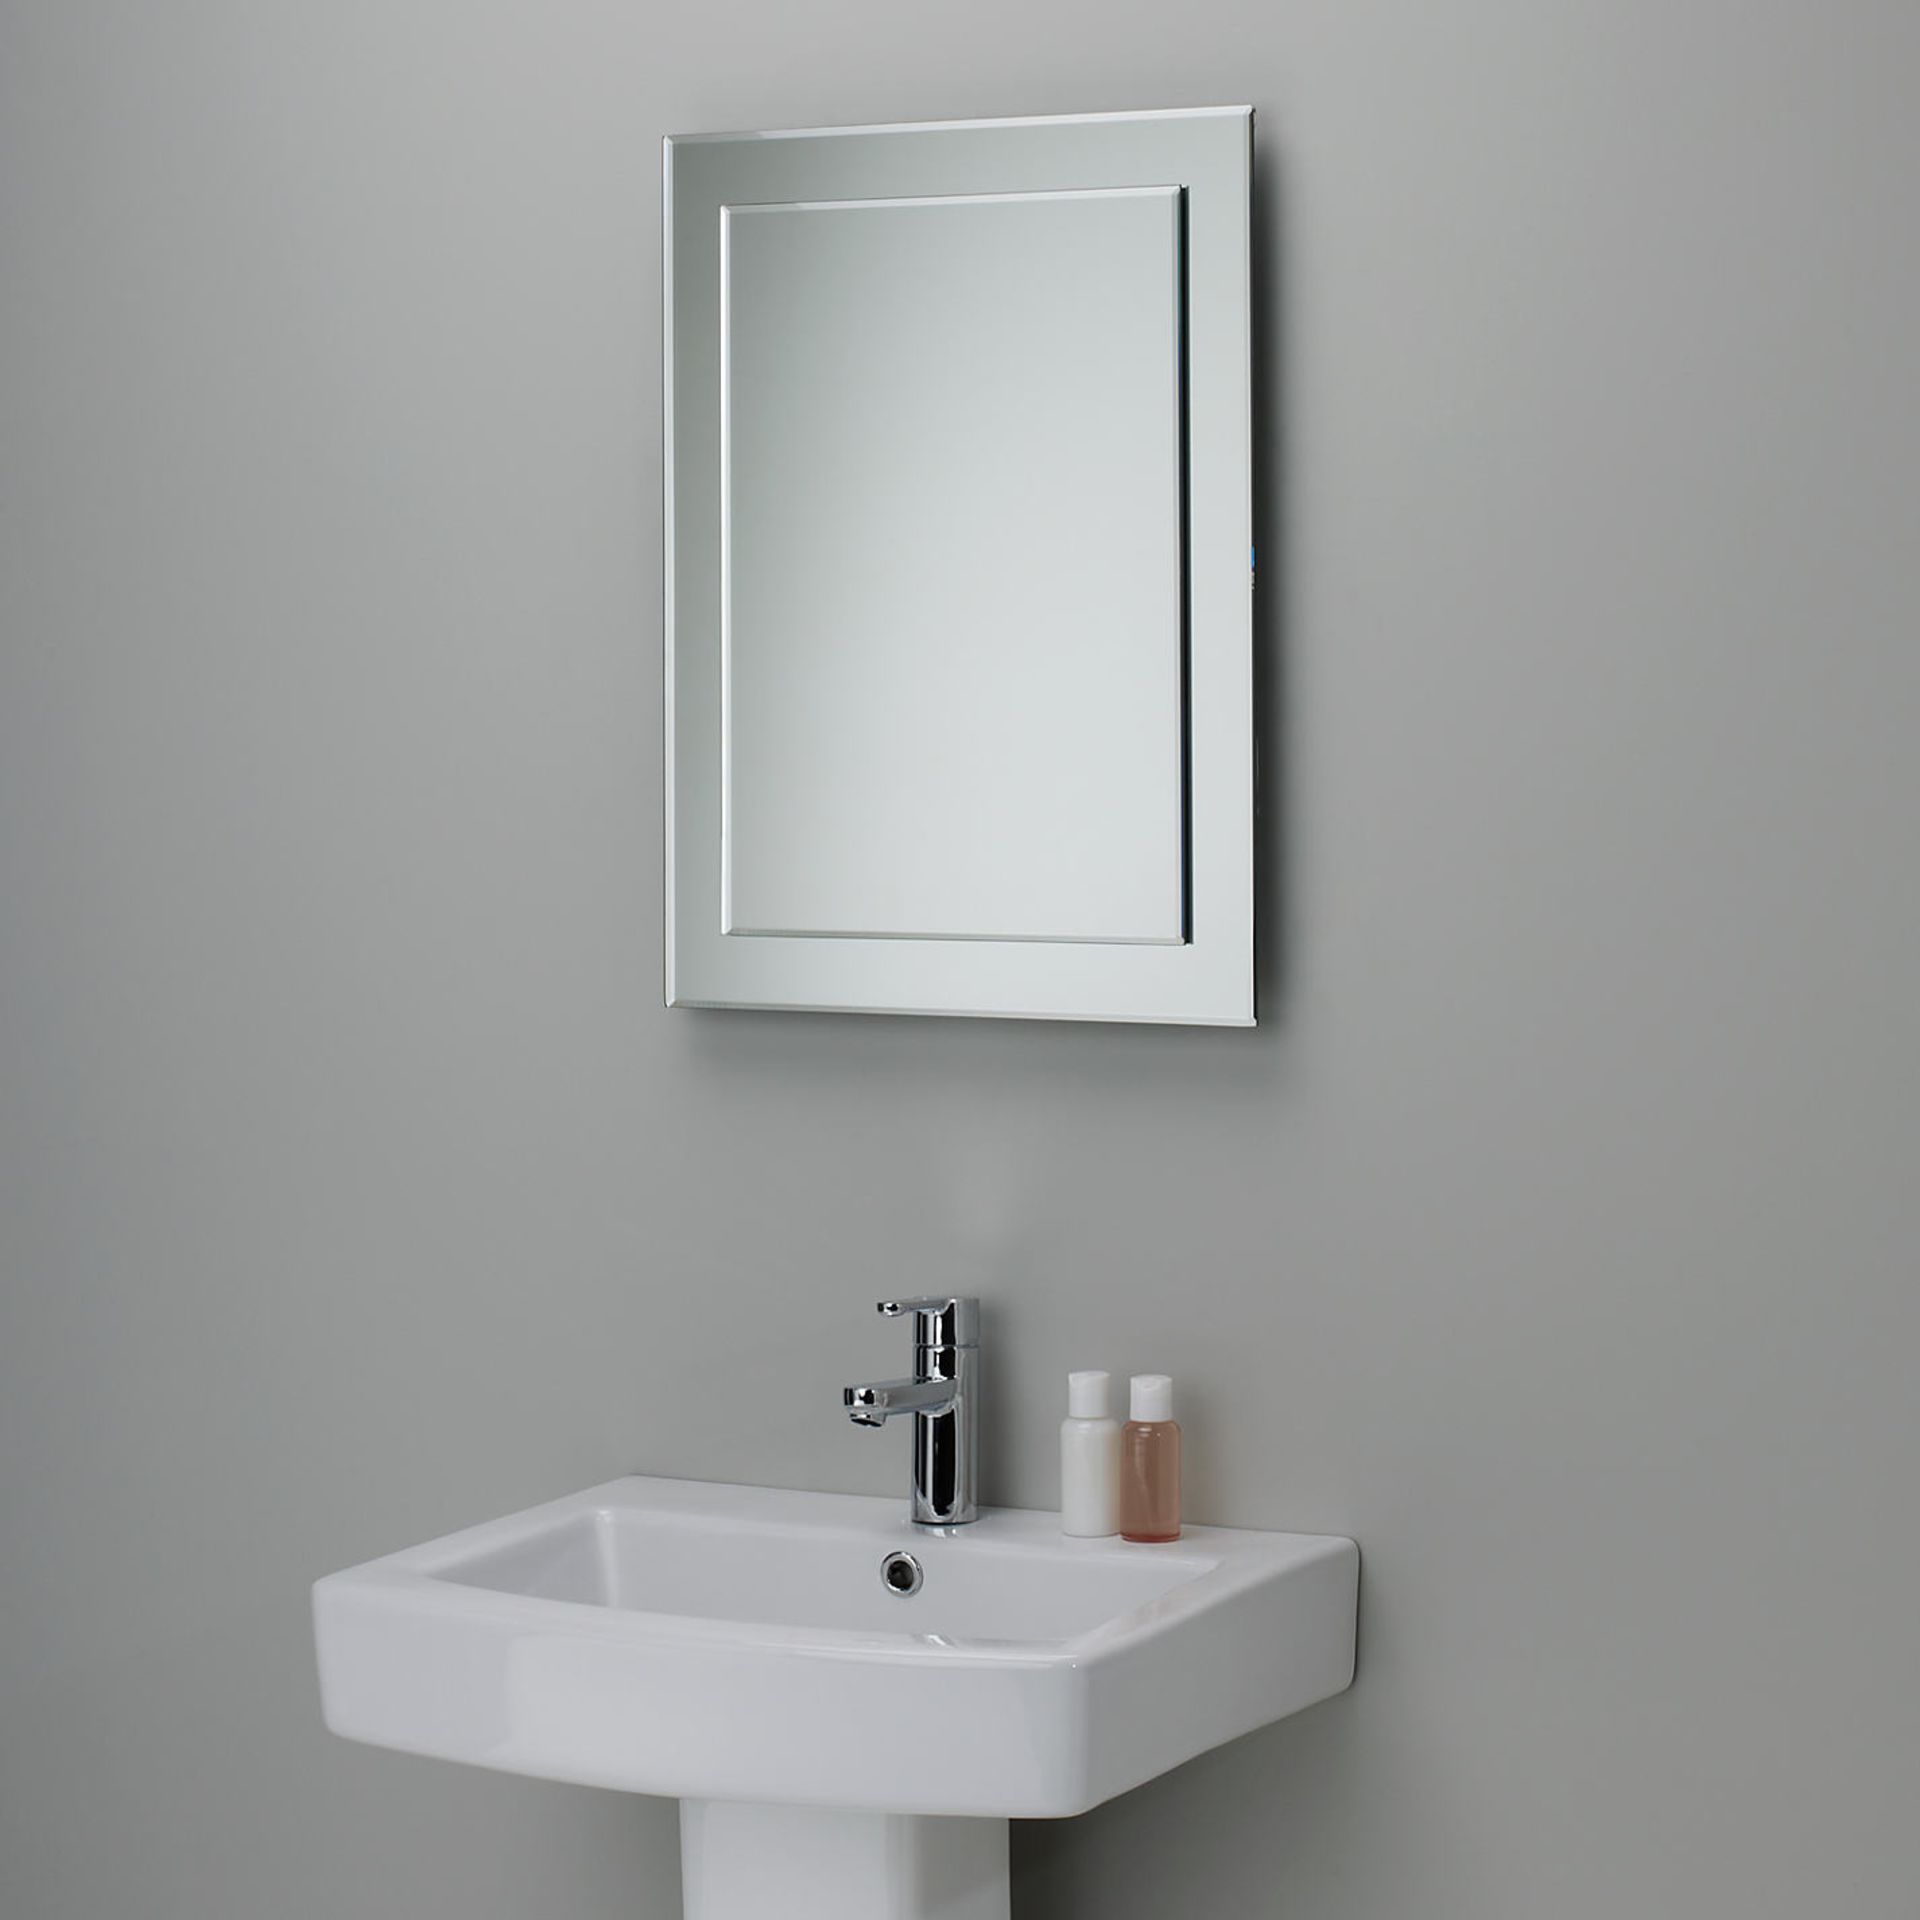 1 x BOXED ROPER RHODES CLARITY ILLUMINATED BATHROOM MIRROR RRP £180 (17.2.17) *PLEASE NOTE THAT